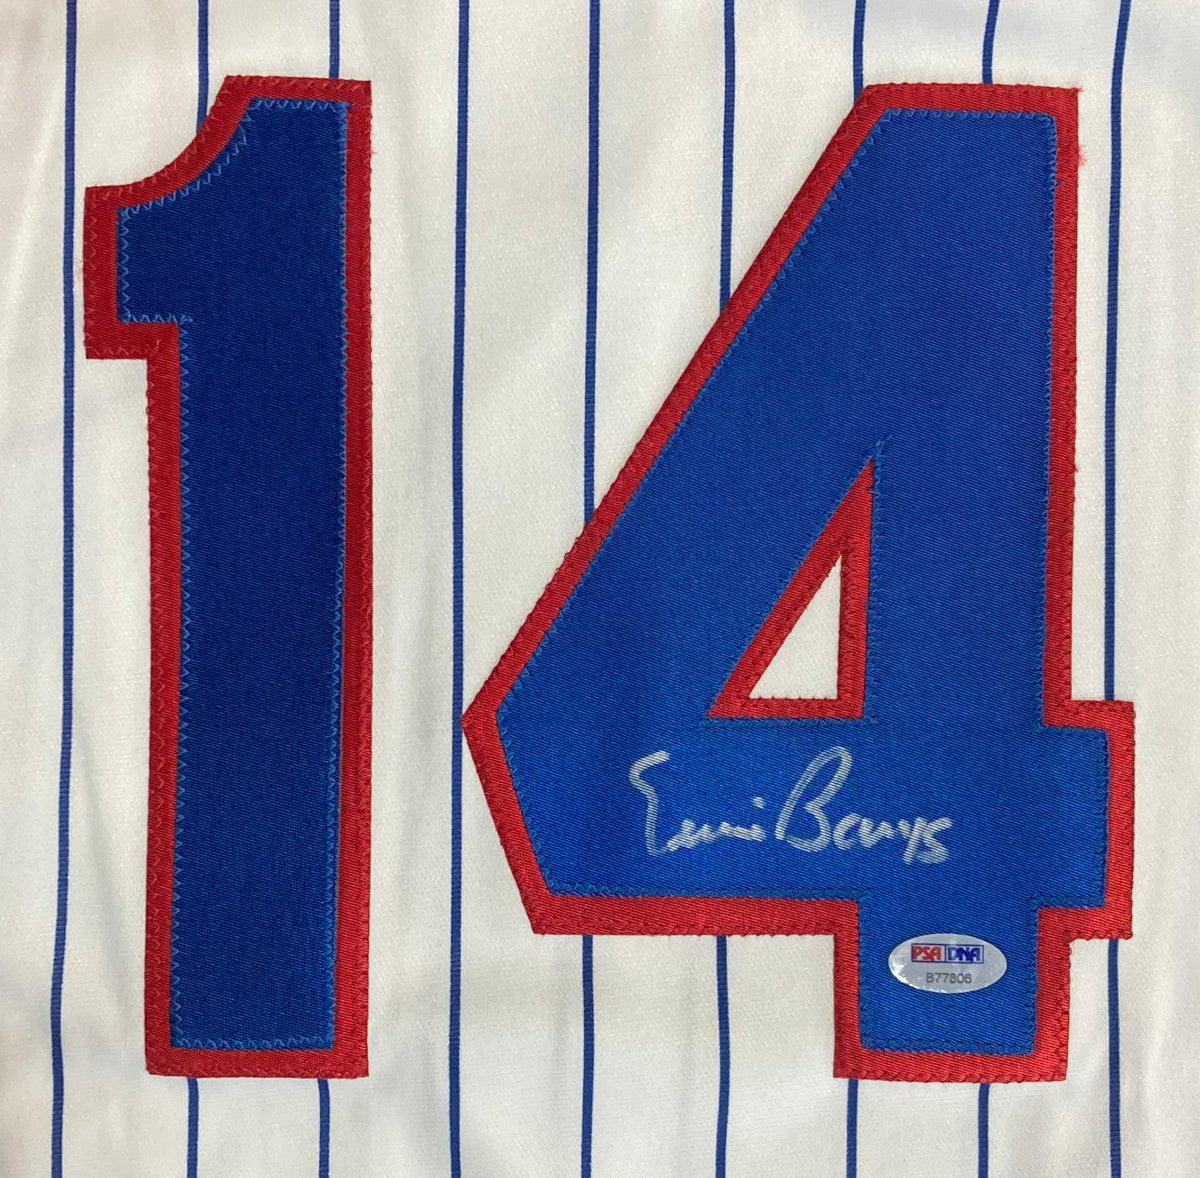 Ernie Banks Signed Chicago Cubs Majestic Baseball Jersey PSA B77806 –  Sports Integrity